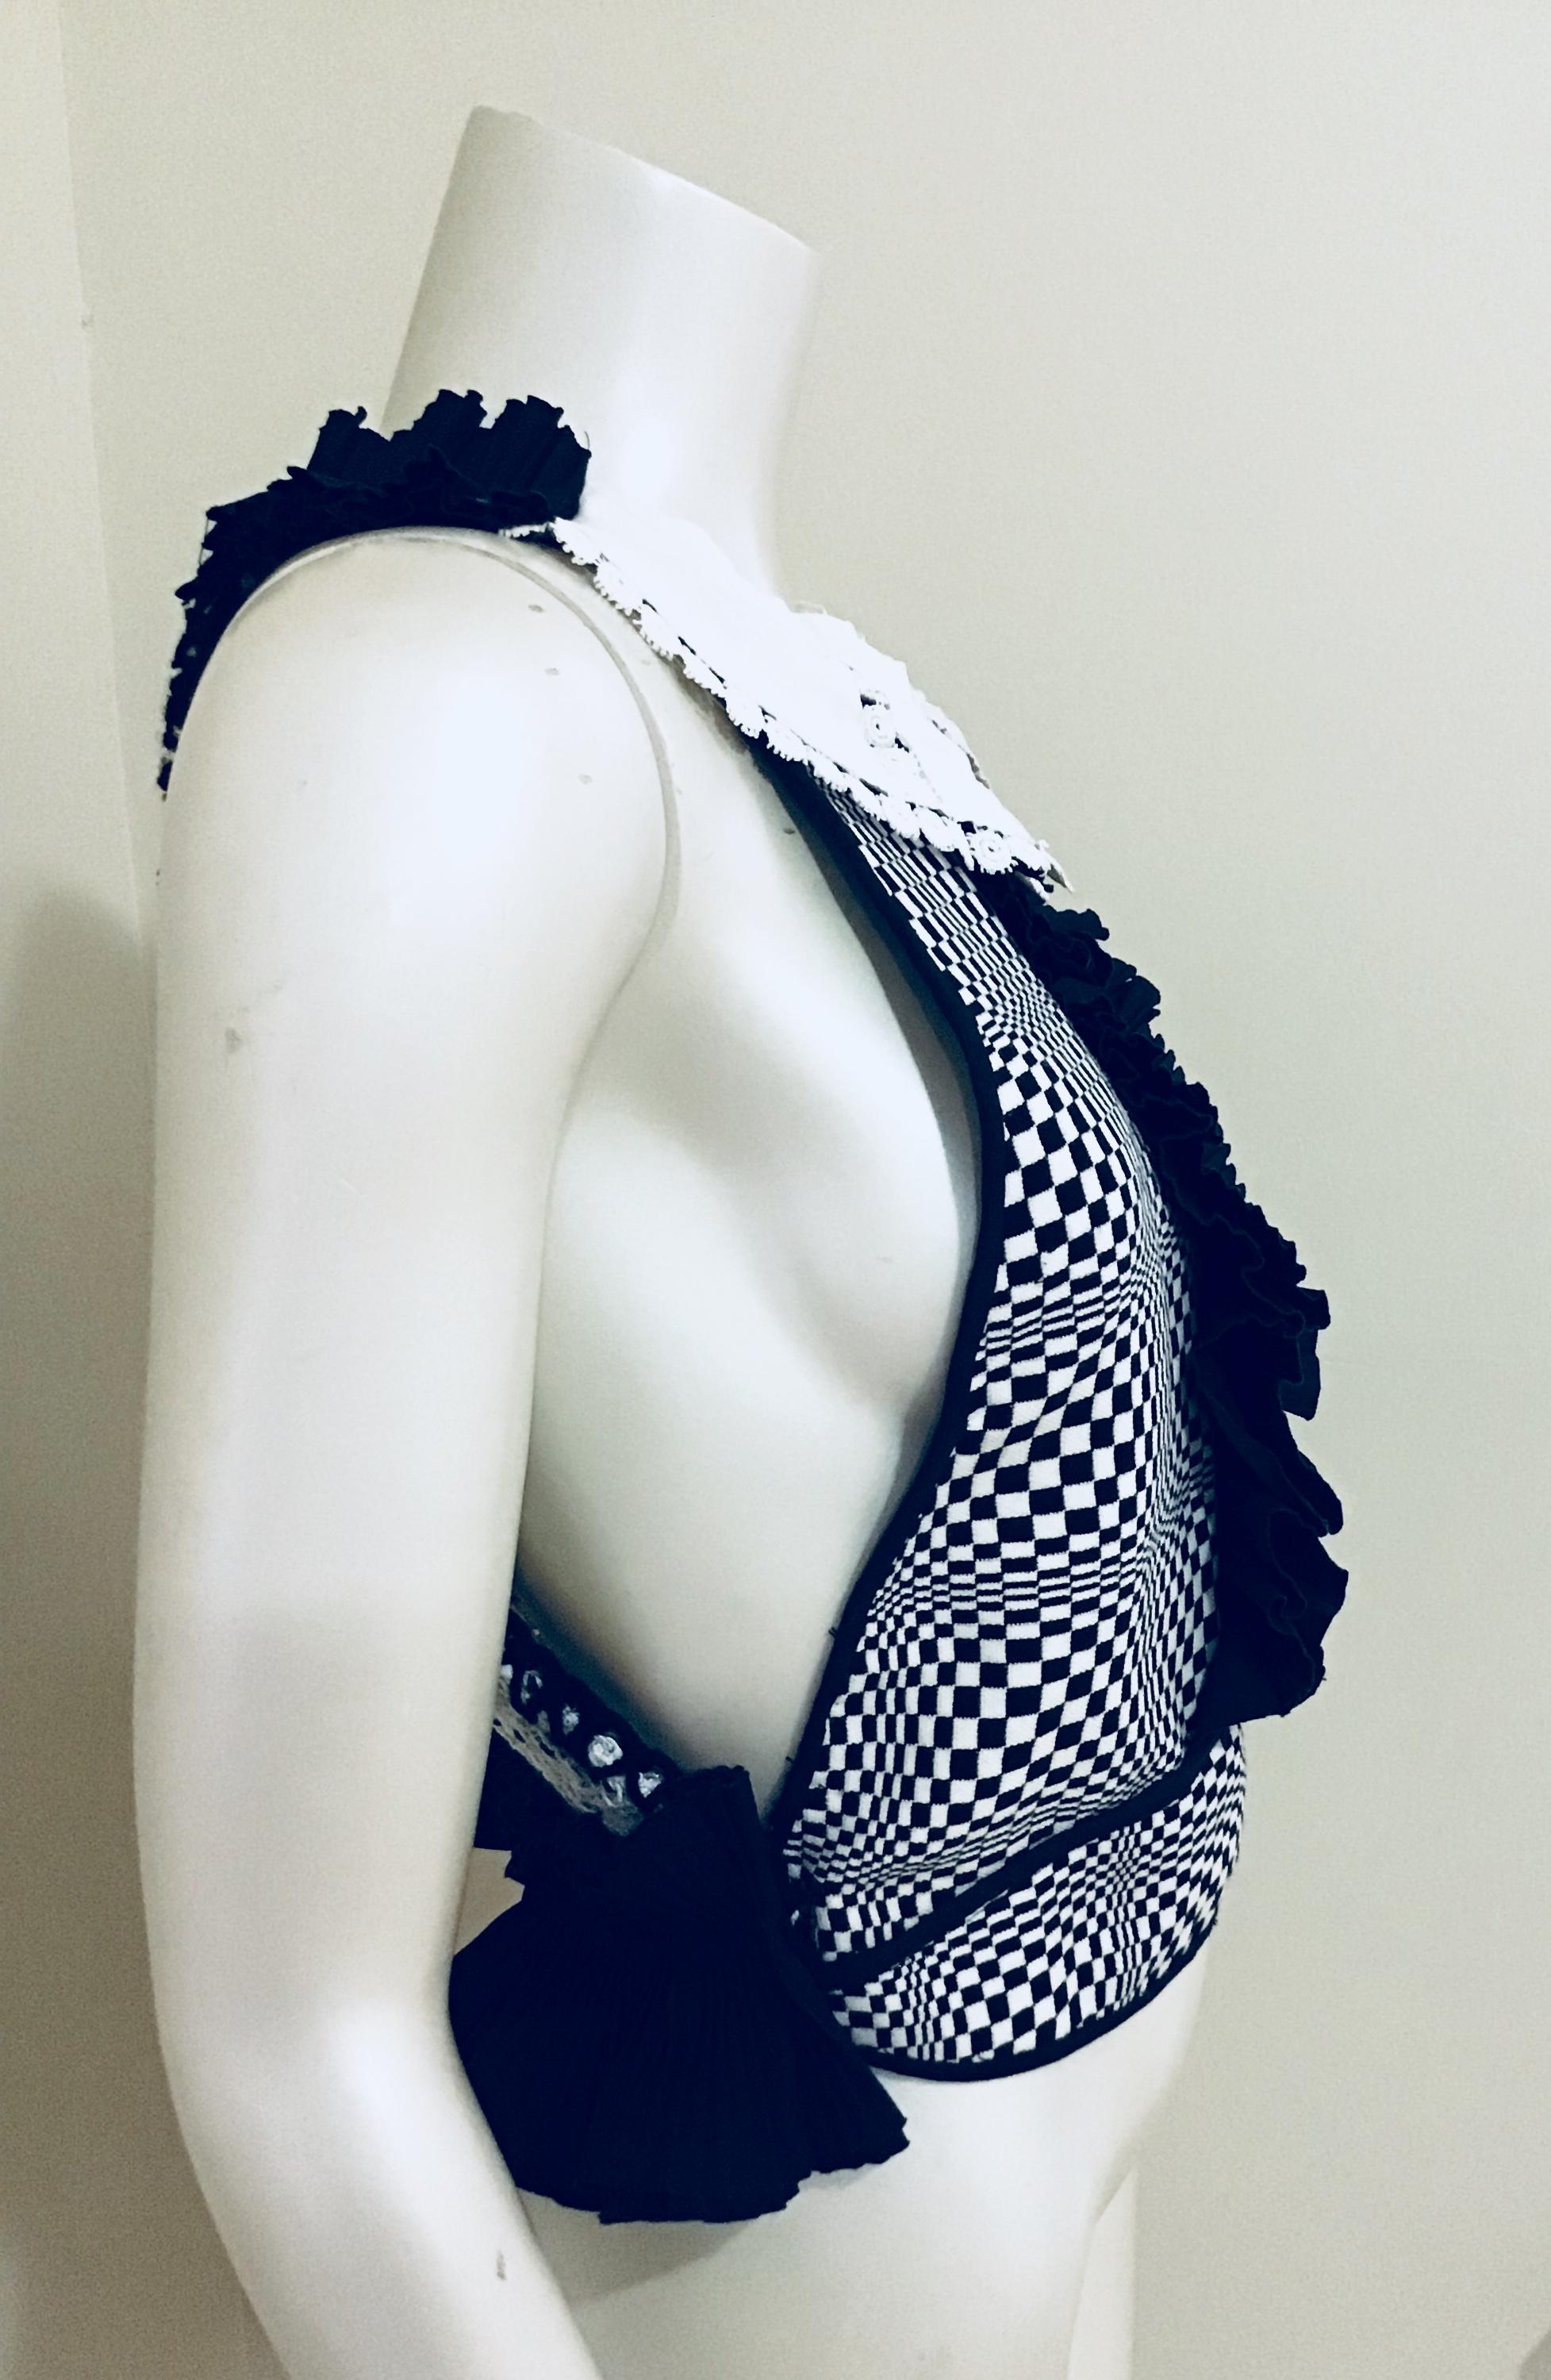 This Black & White vintage fabric combined with a 40s cuff as its collar, and its open knit back together create this couture cutie. The black ruffle center adds flare to an already unique piece. Wear this one of a kind top with jeans at Saturday